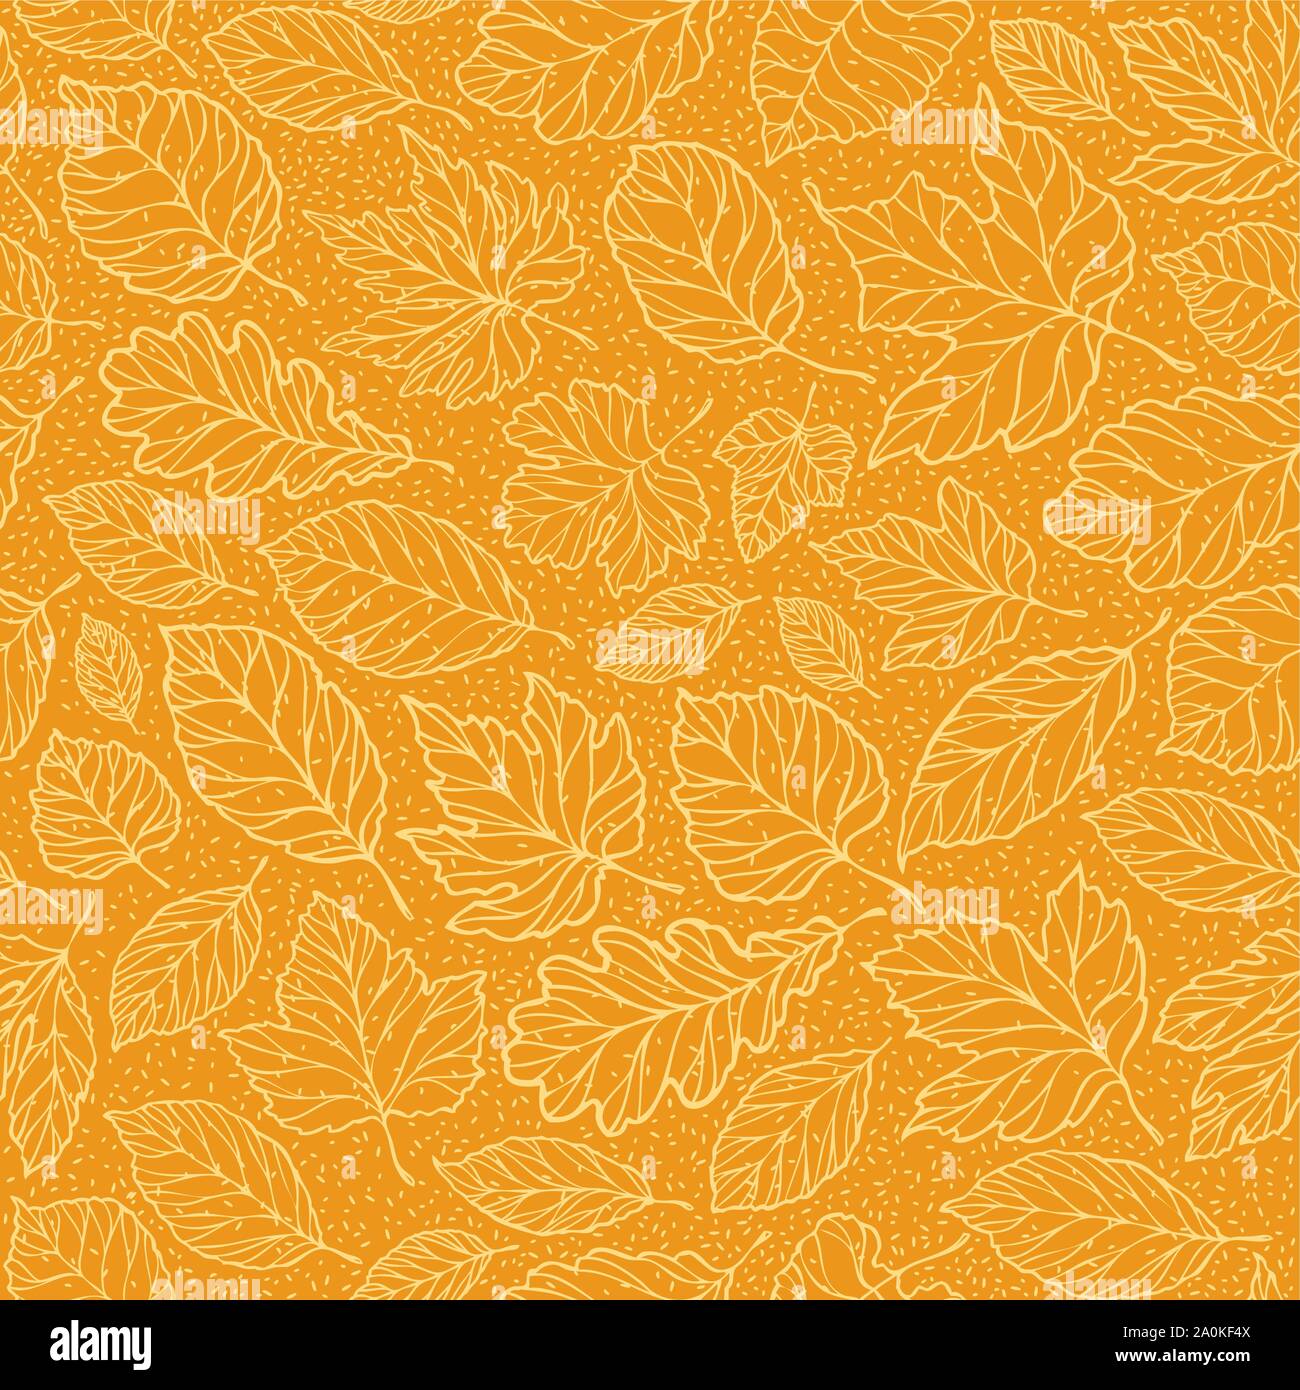 Autumn seamless background with leaves. Leaf fall vector illustration Stock Vector